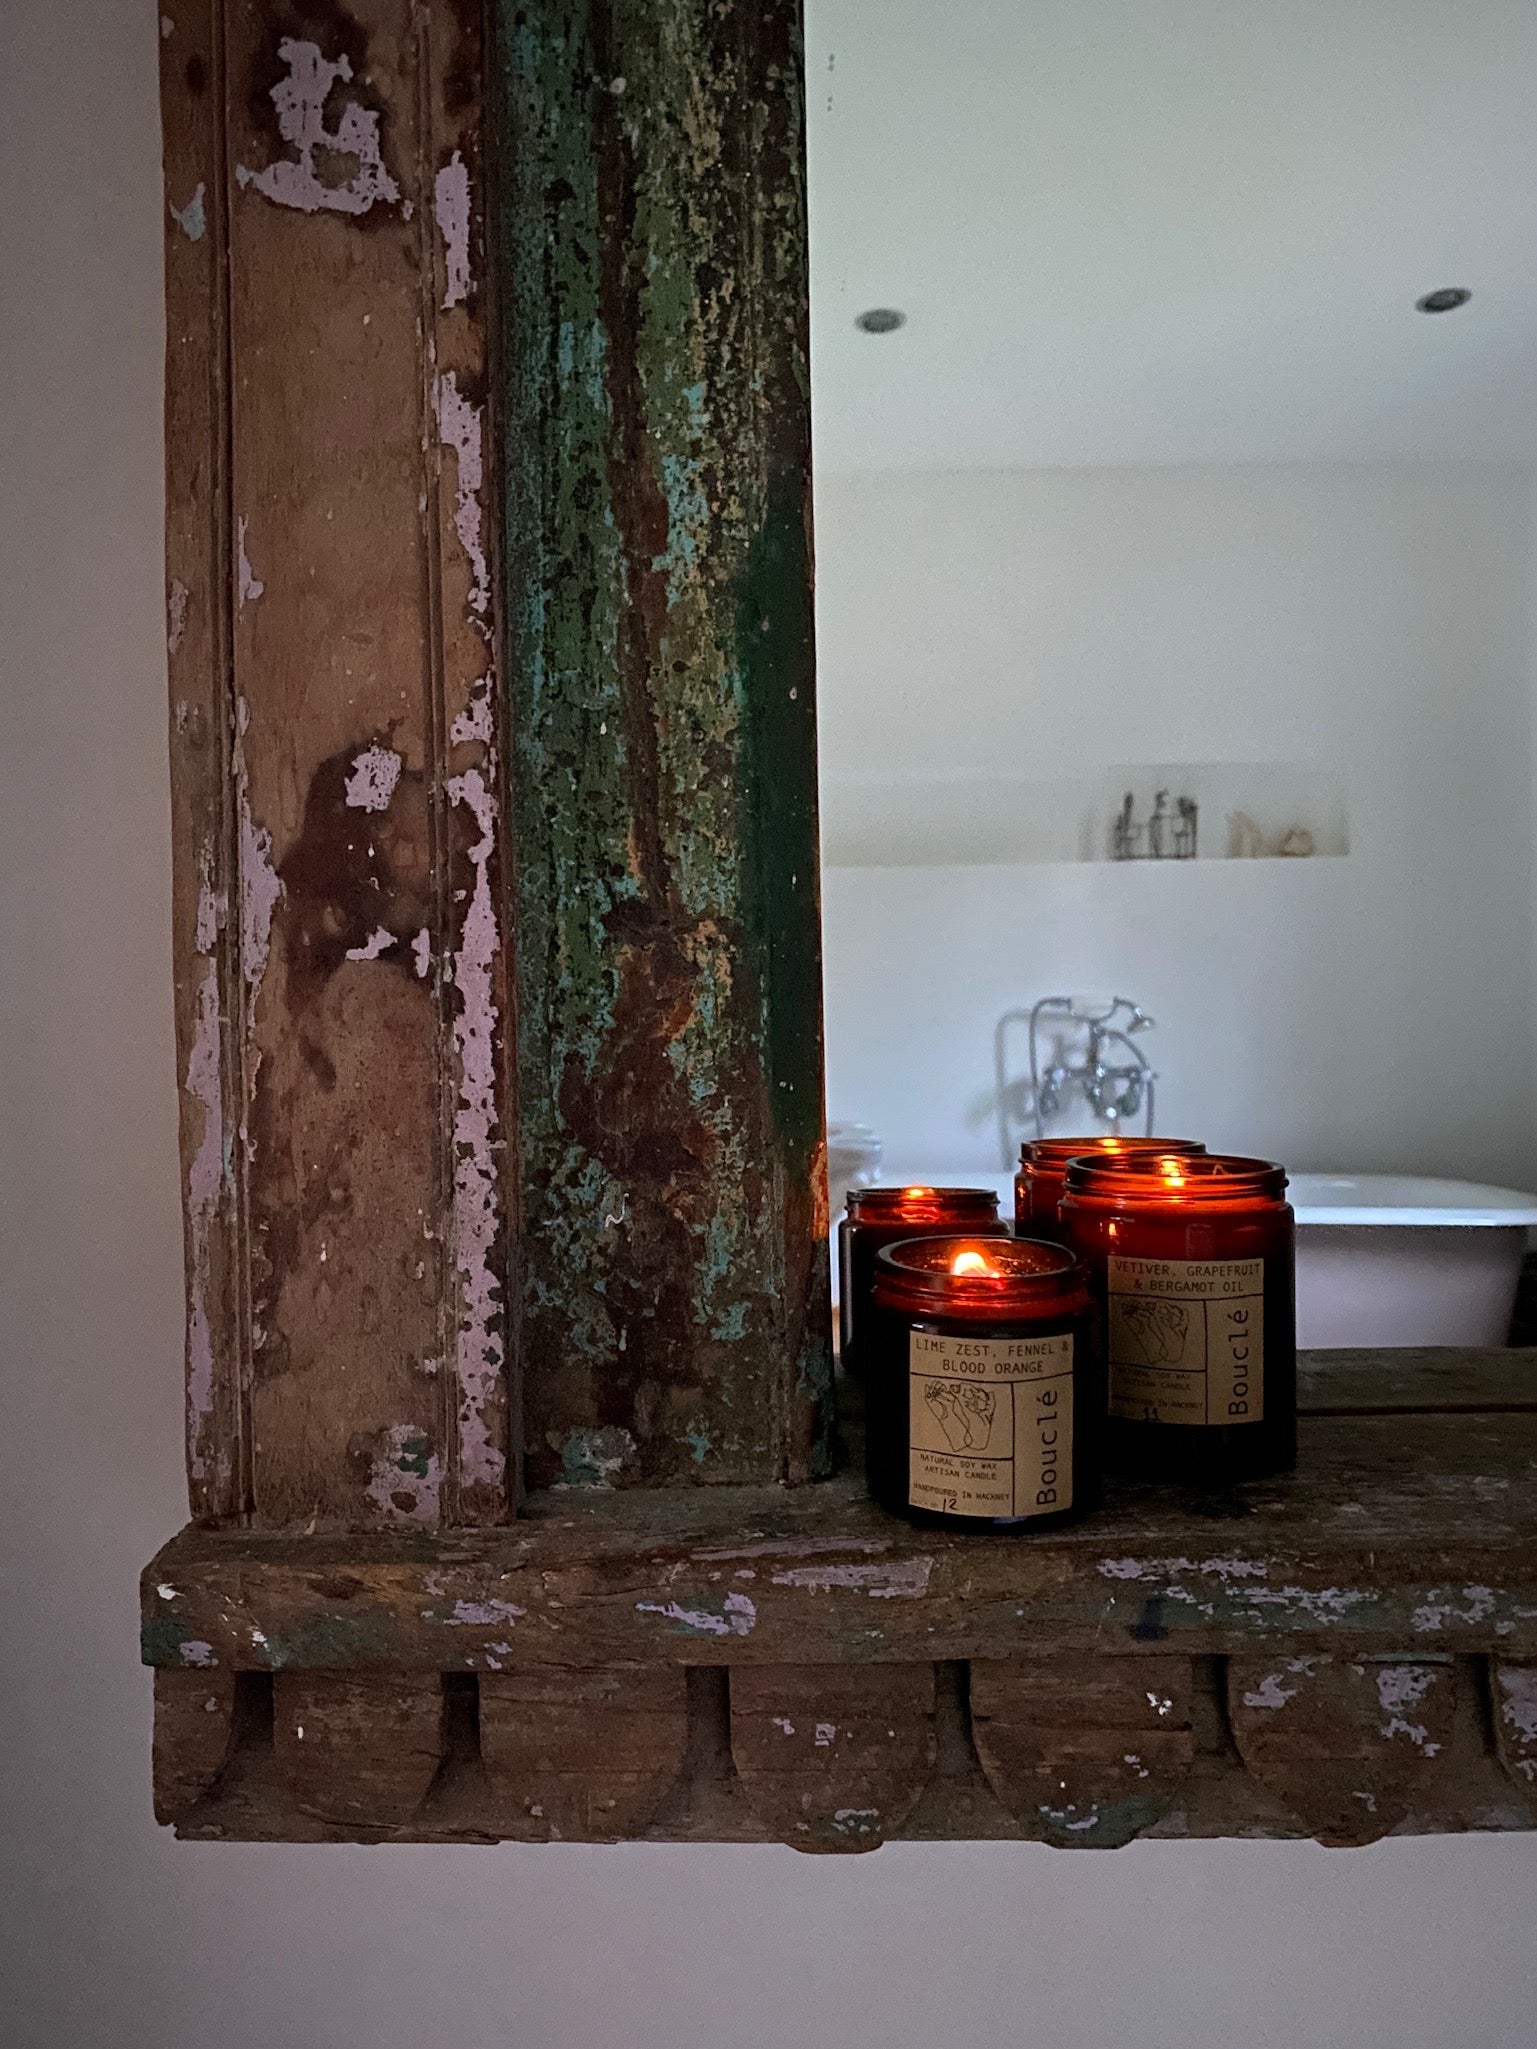 Amber glass jar natural vegan candles, lit on the side creating a cosy home with an all natural aroma